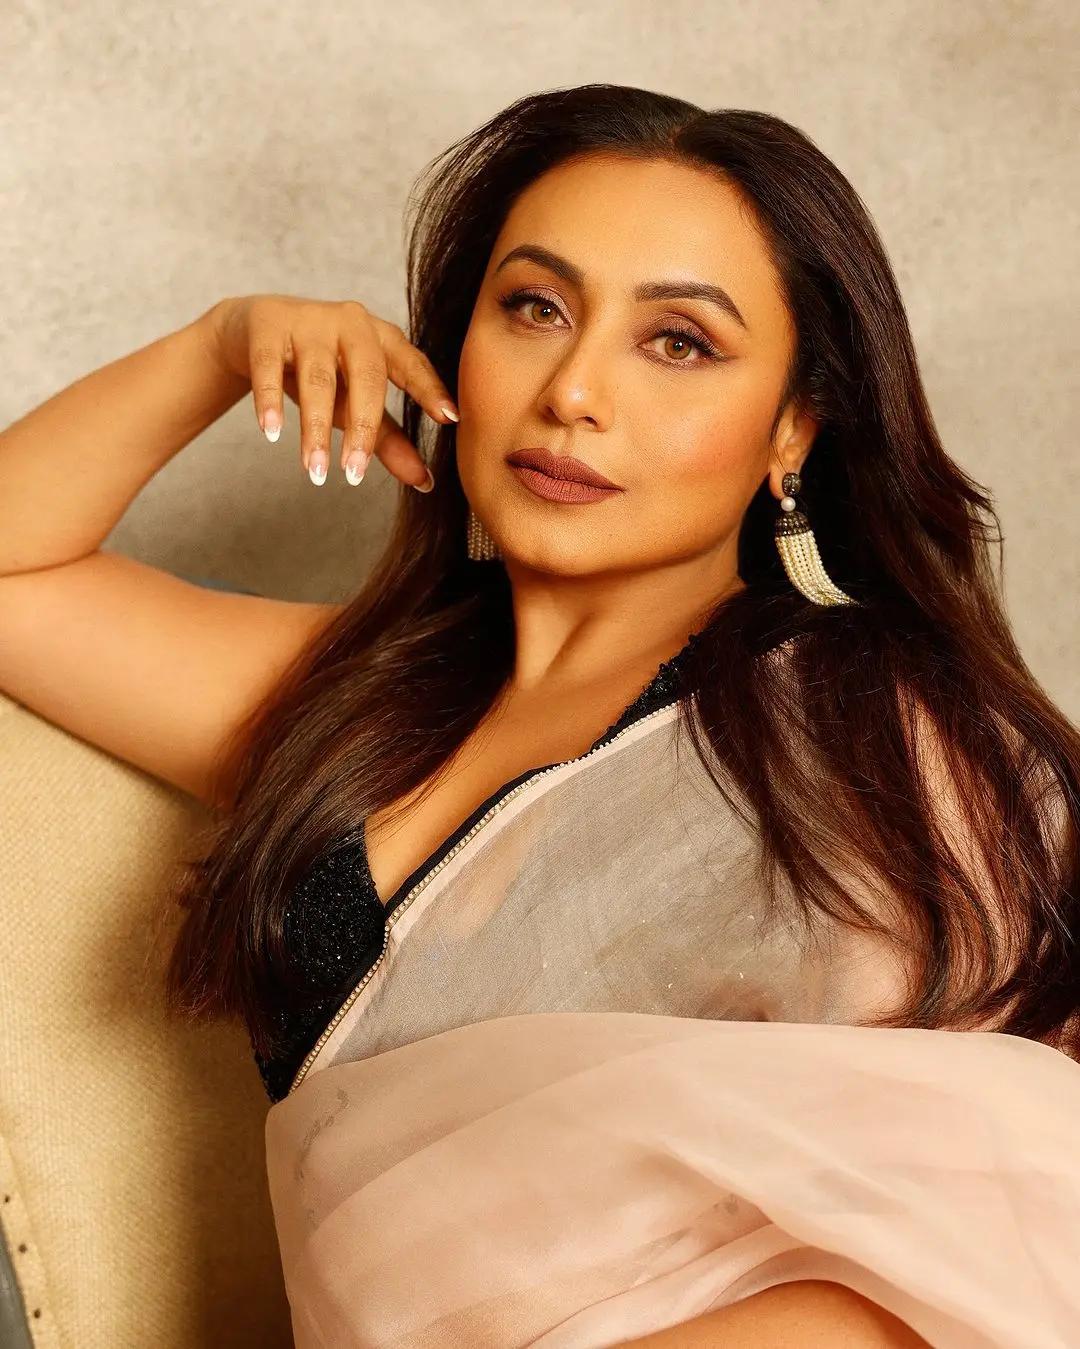 She gained more fame in 1998 thanks to her performance in the action movie Ghulam, which she starred in alongside Aamir Khan. Her big break came when she played the romantic love interest of Shah Rukh Khan's character in Kuch Kuch Hota Hai